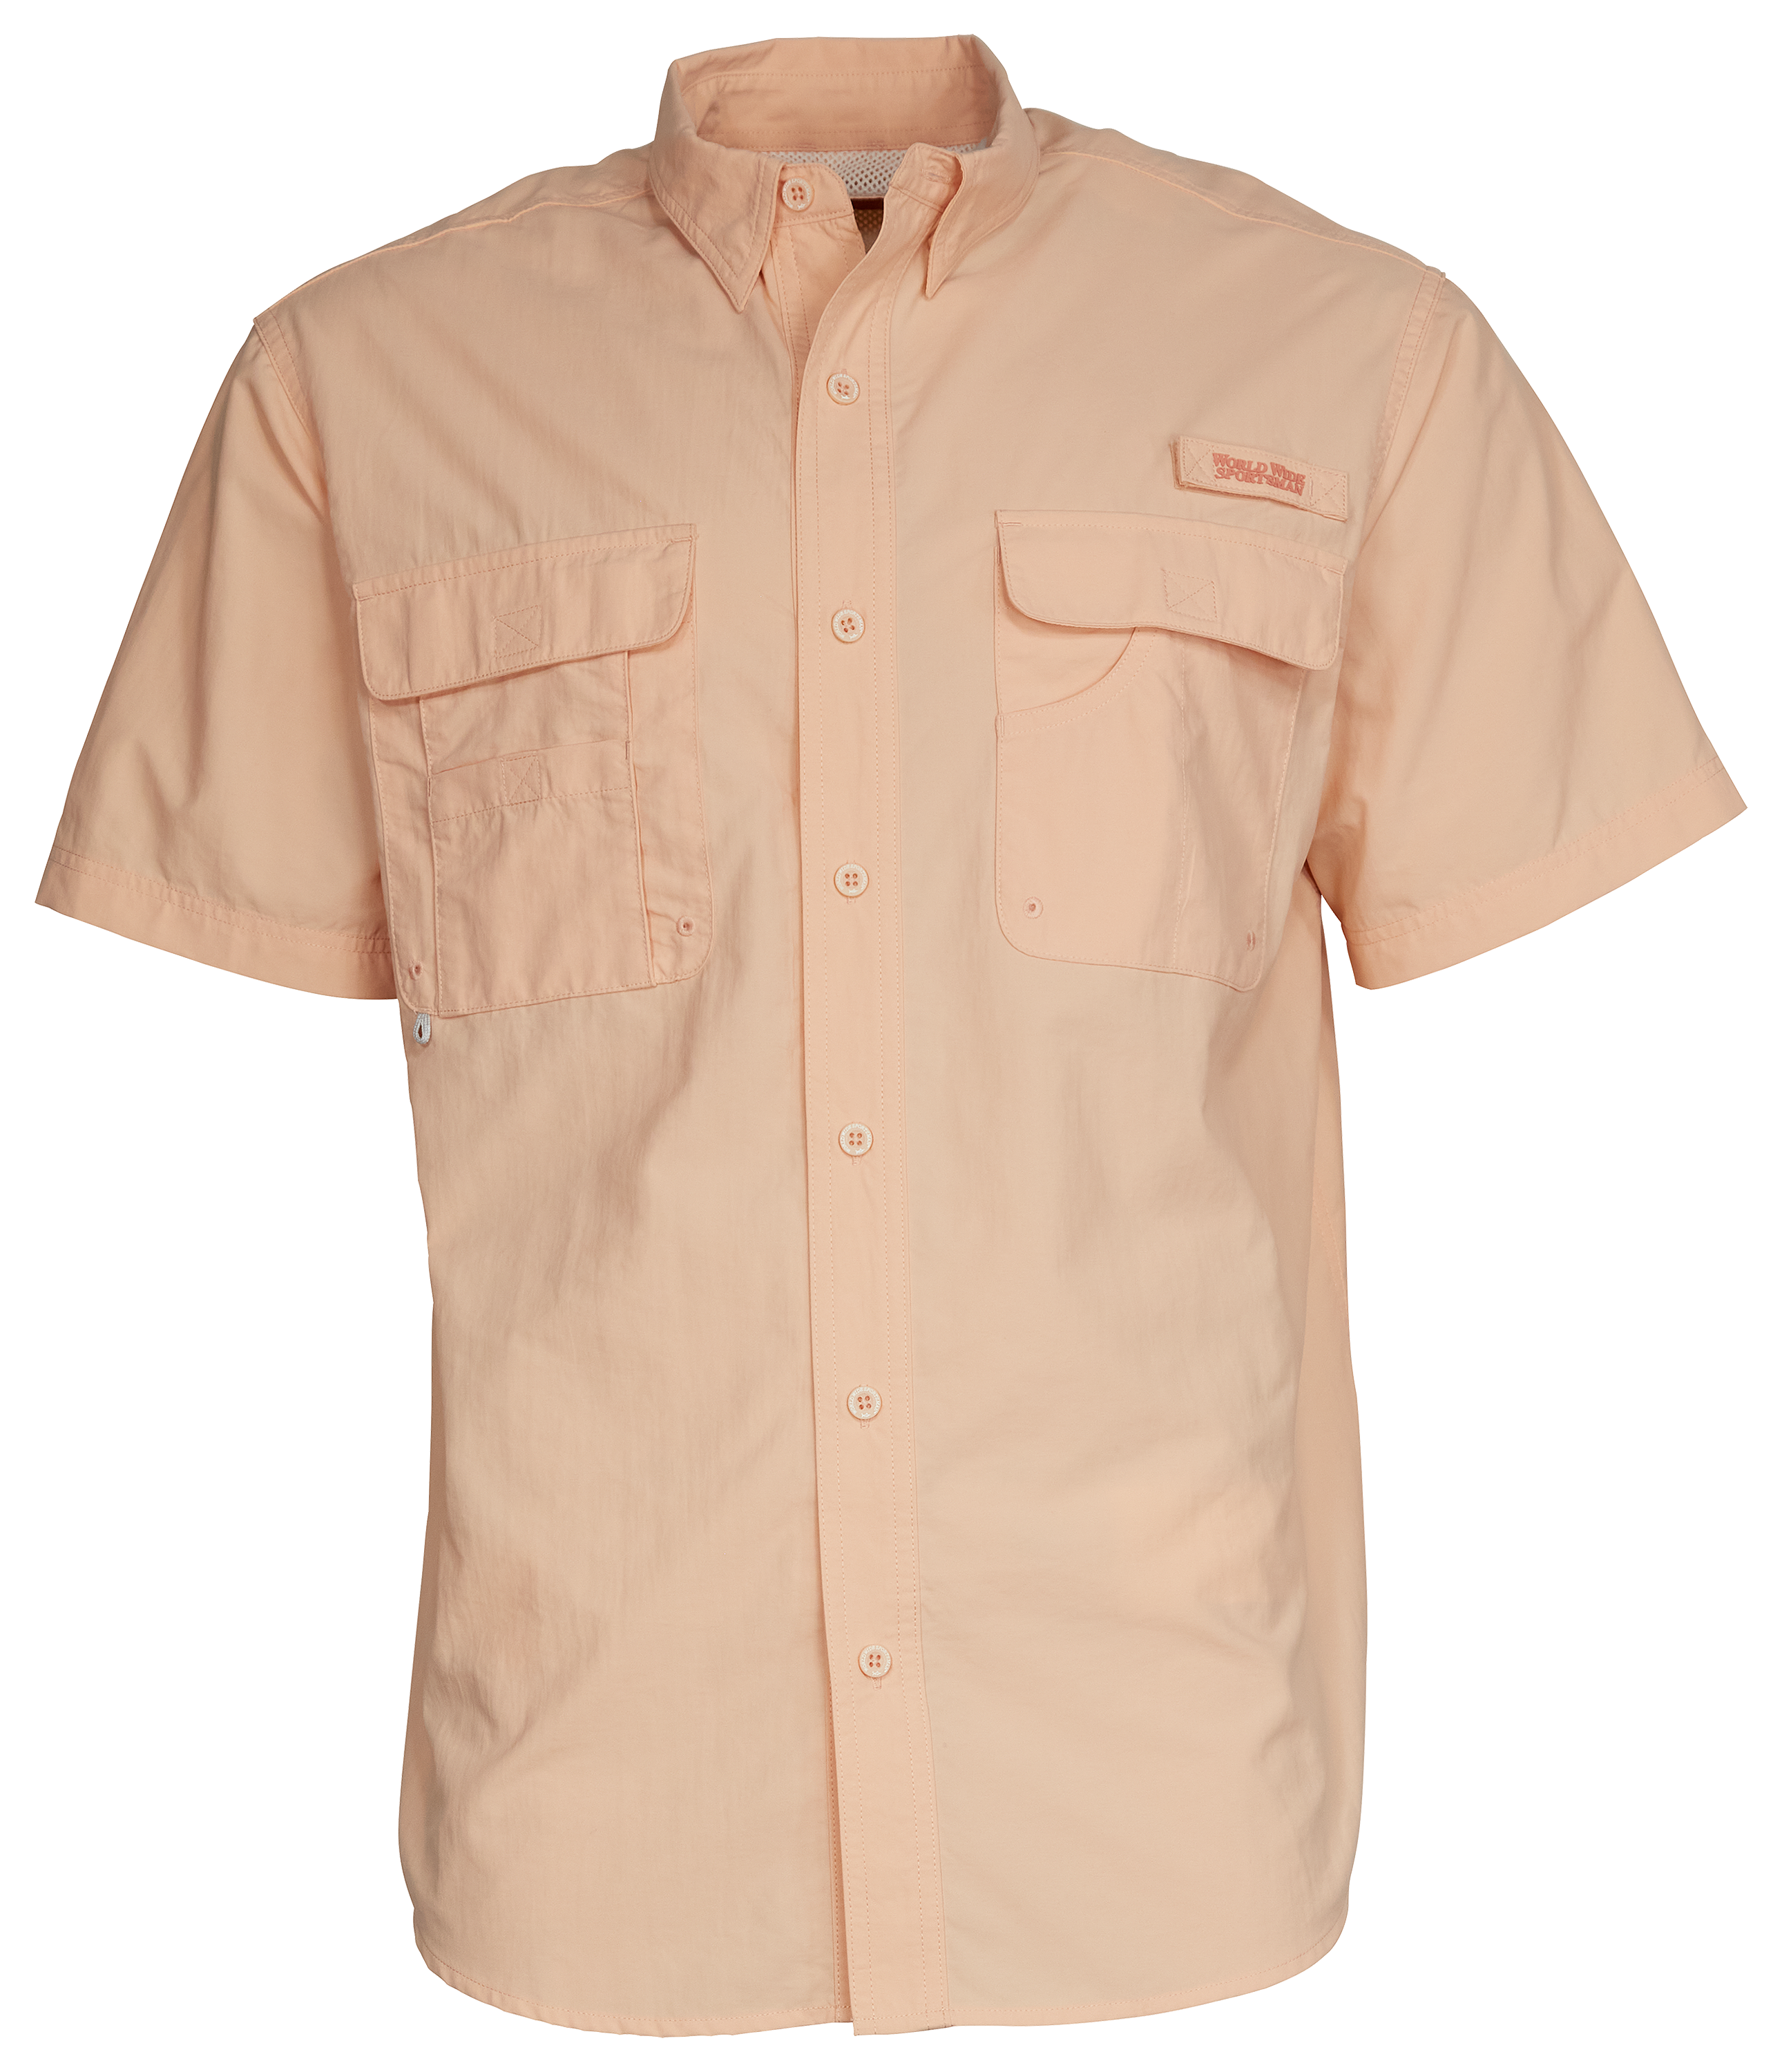 World Wide Sportsman Recycled-Nylon Angler 2.0 Short-Sleeve Button-Down Shirt for Men - Almost Apricot - M